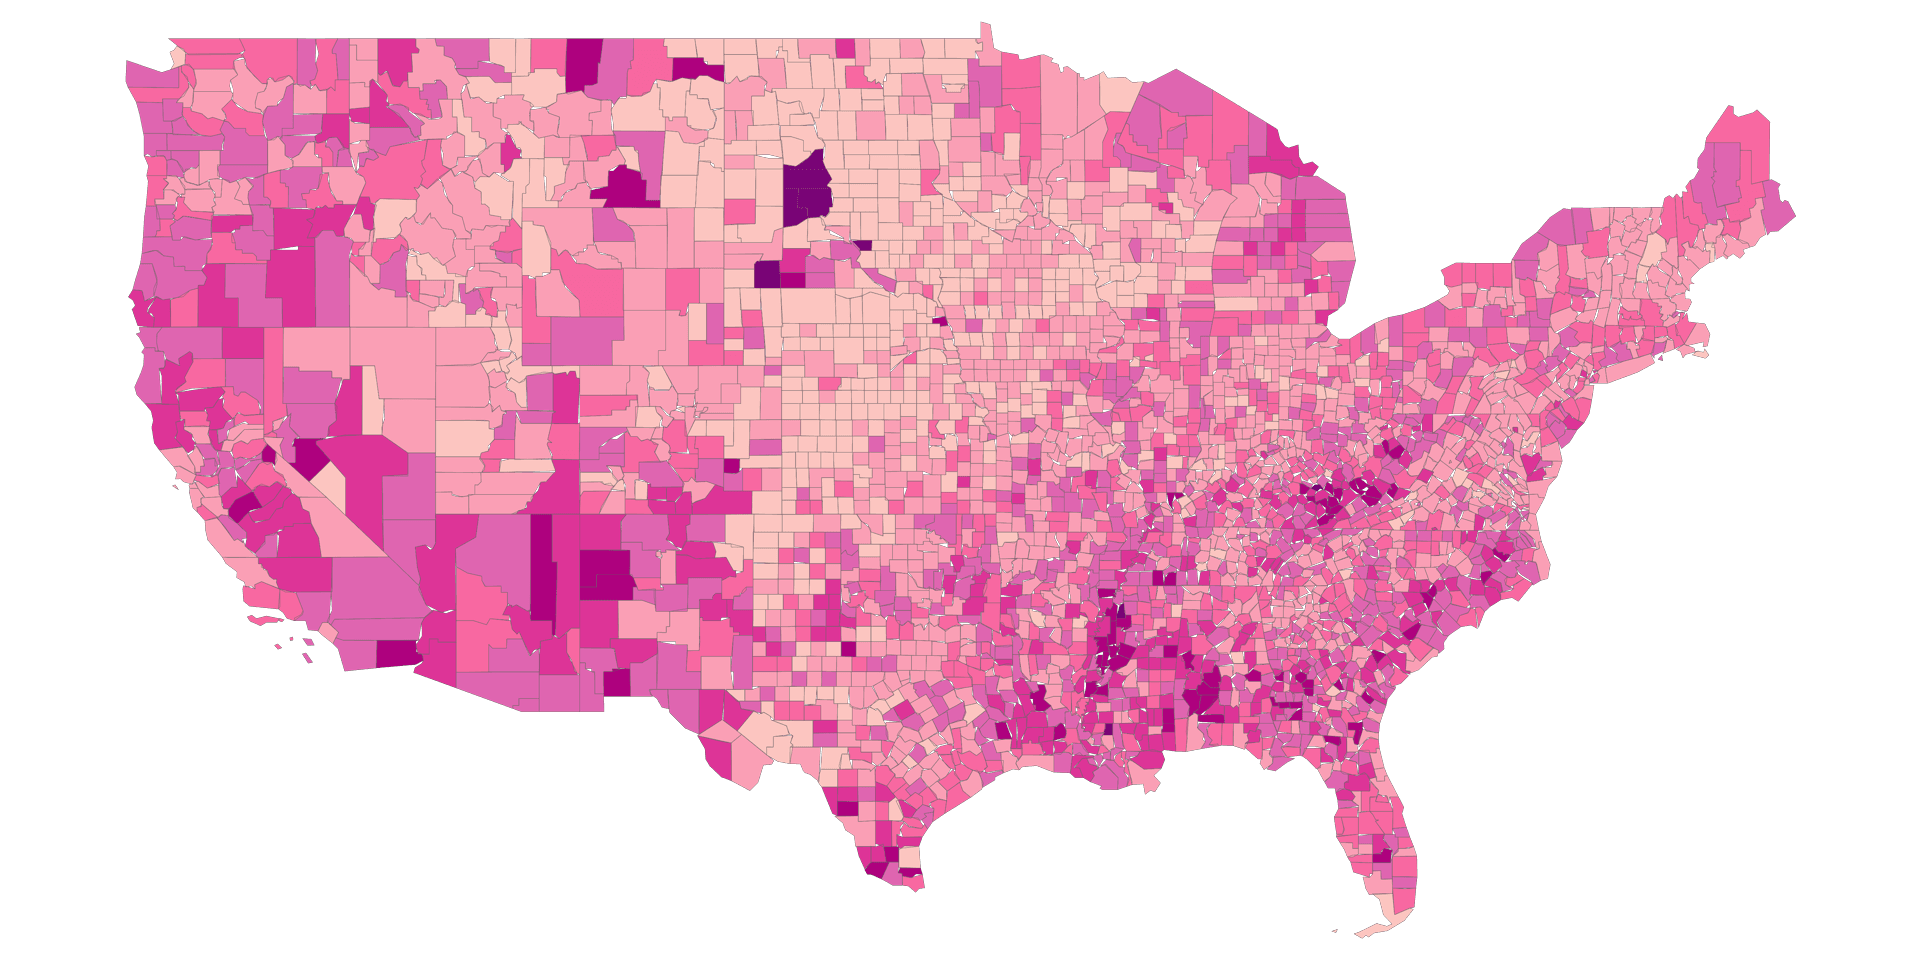 United States Unemployment Rate by County